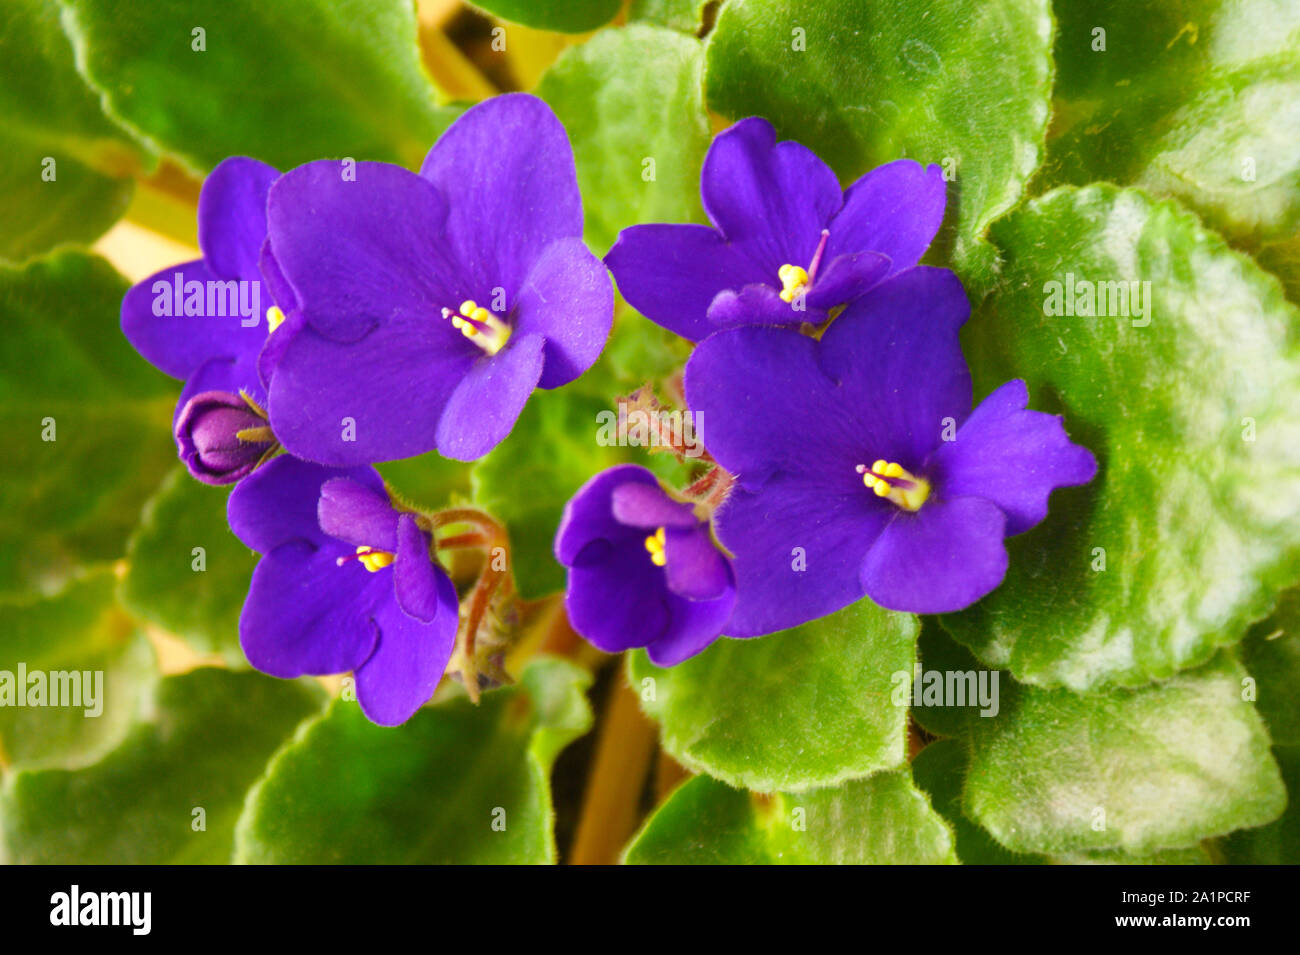 Purple beautiful pansy flowers on green leaves Stock Photo